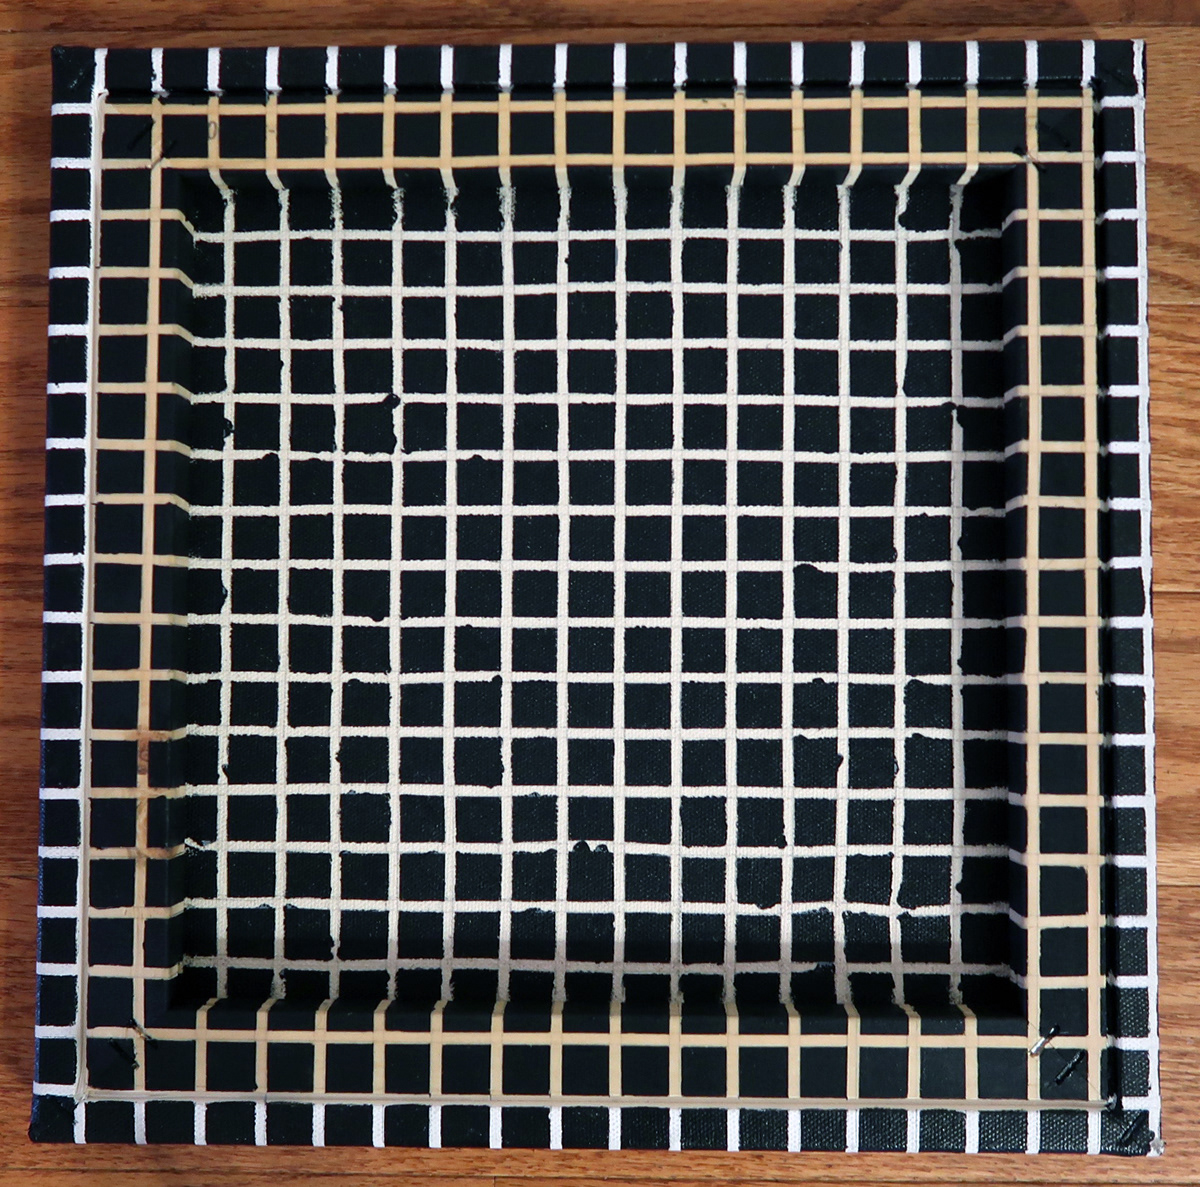 Space  grid square lines side balance matter antimatter Opposites painting  